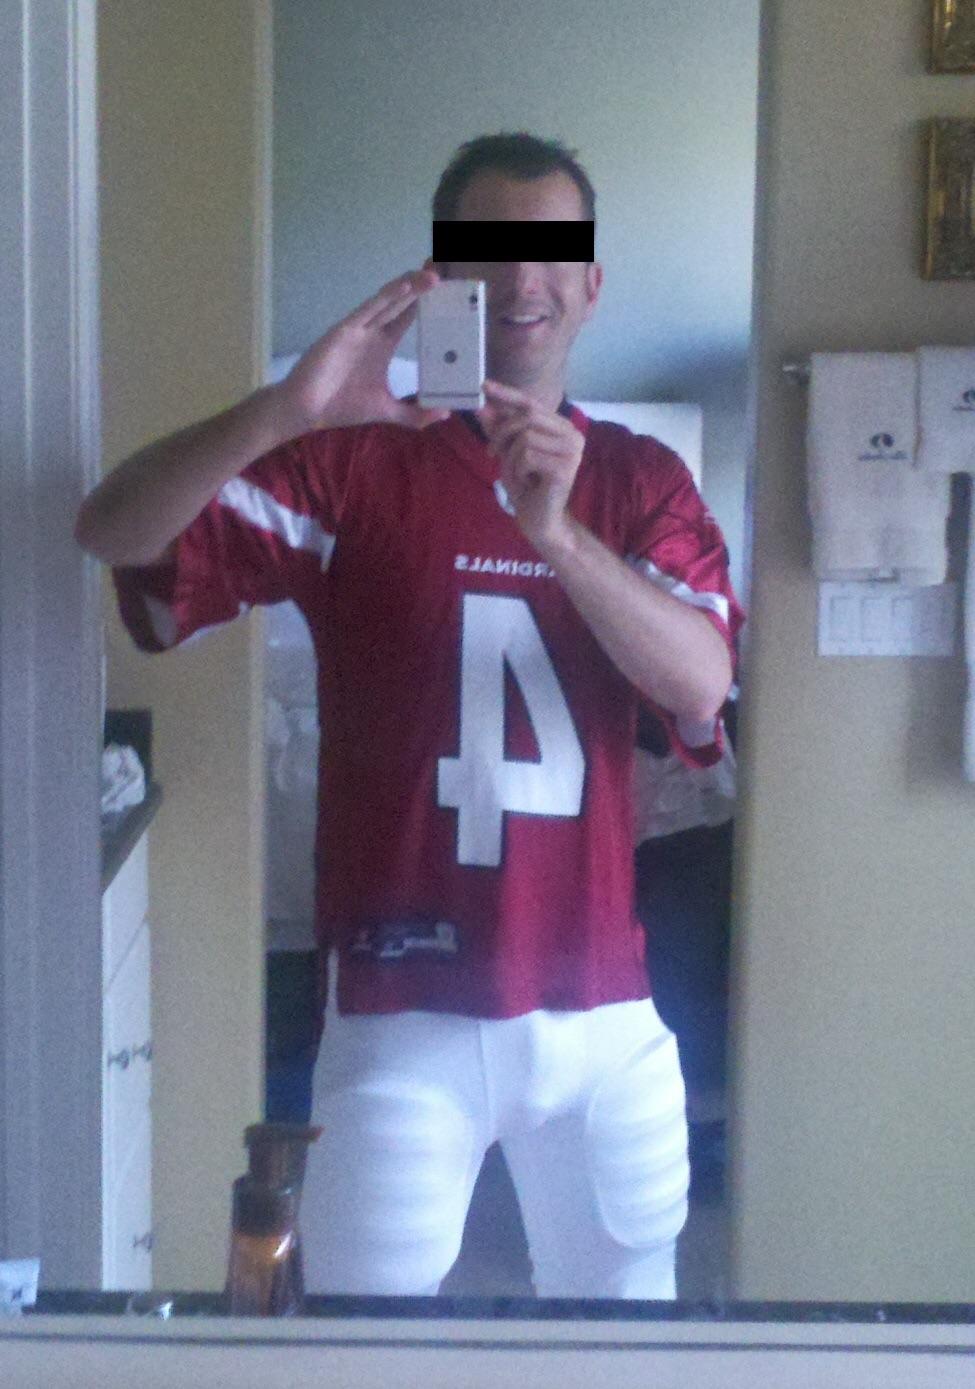 Throwback to my Halloween costume a few years ago. I don’t play football; didn’t know to wear a cup.